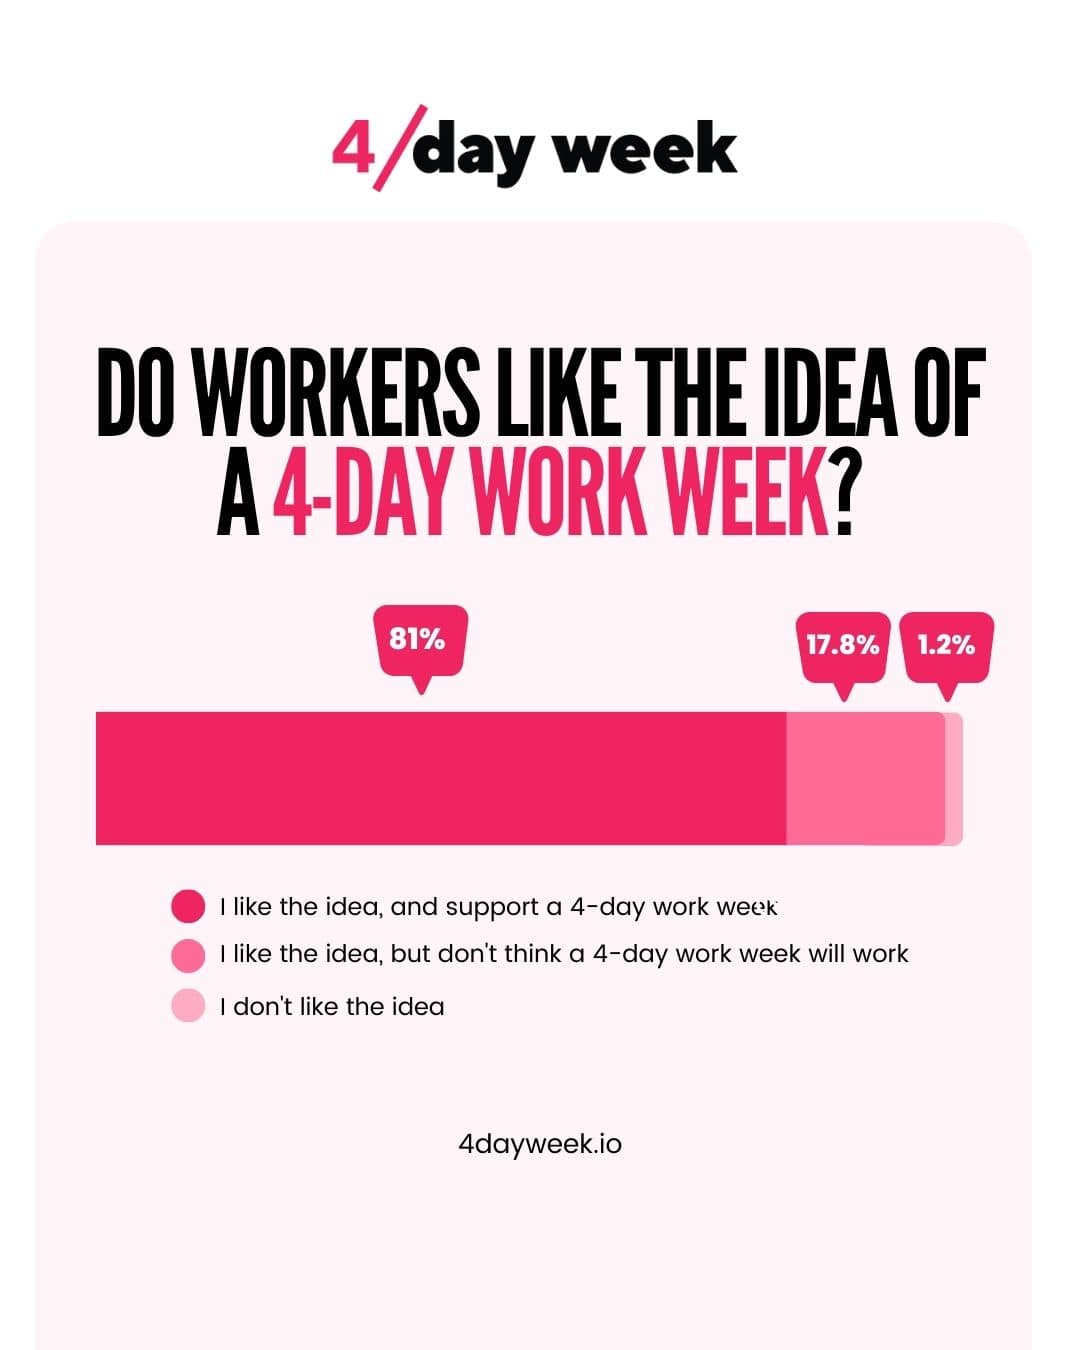 Employees Views on the 4-Day Work Week